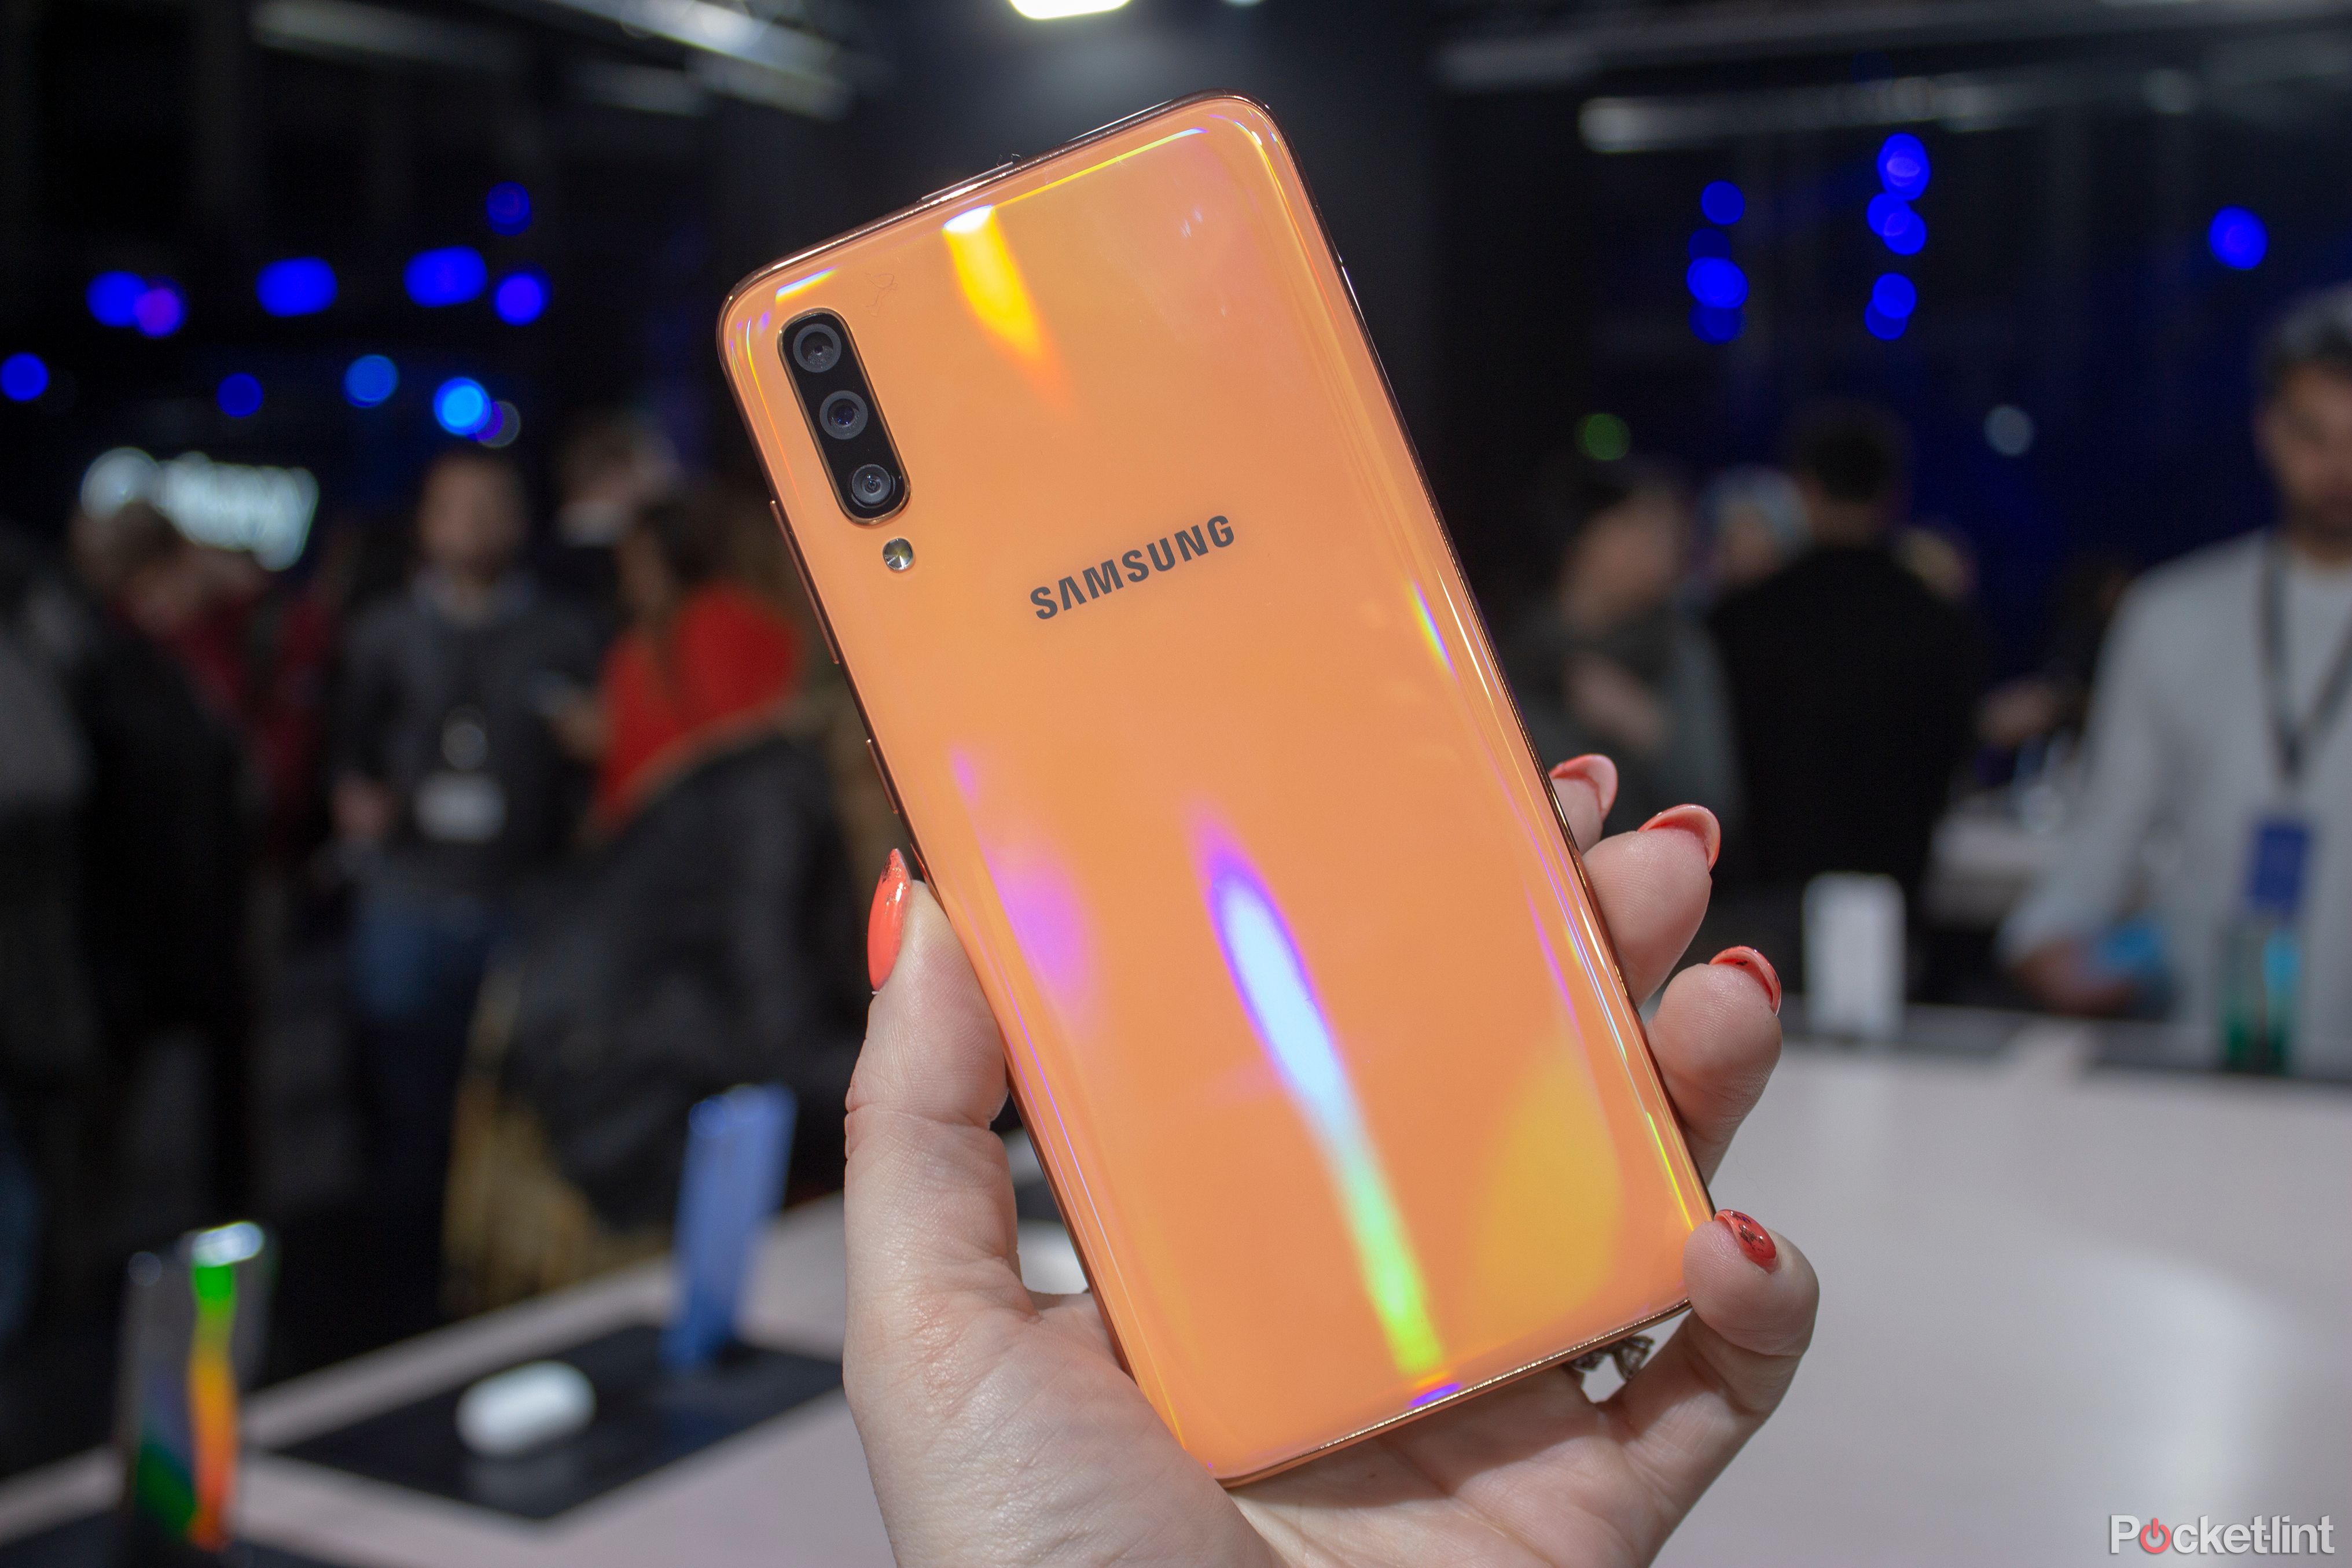 Samsung Galaxy A70 initial review product images image 1